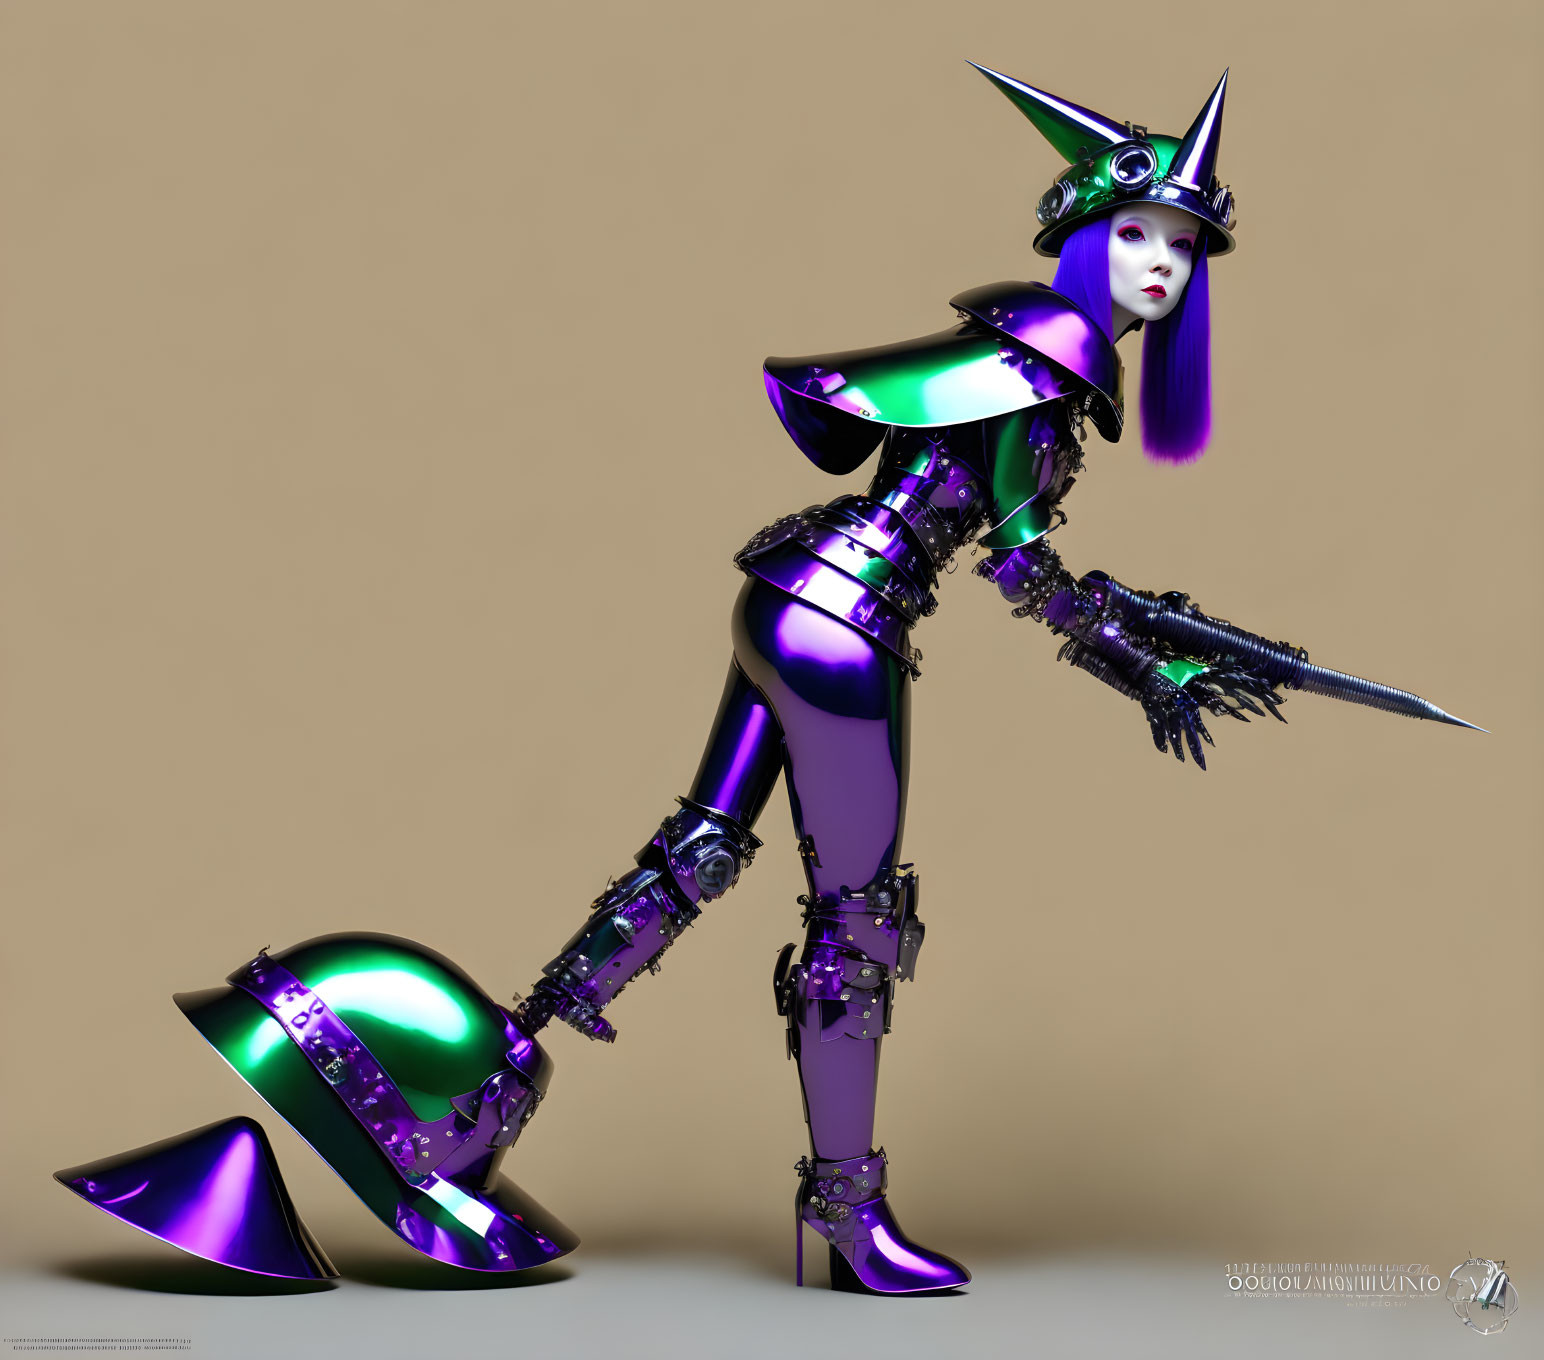 Futuristic female robot in shiny purple and green armor on beige background